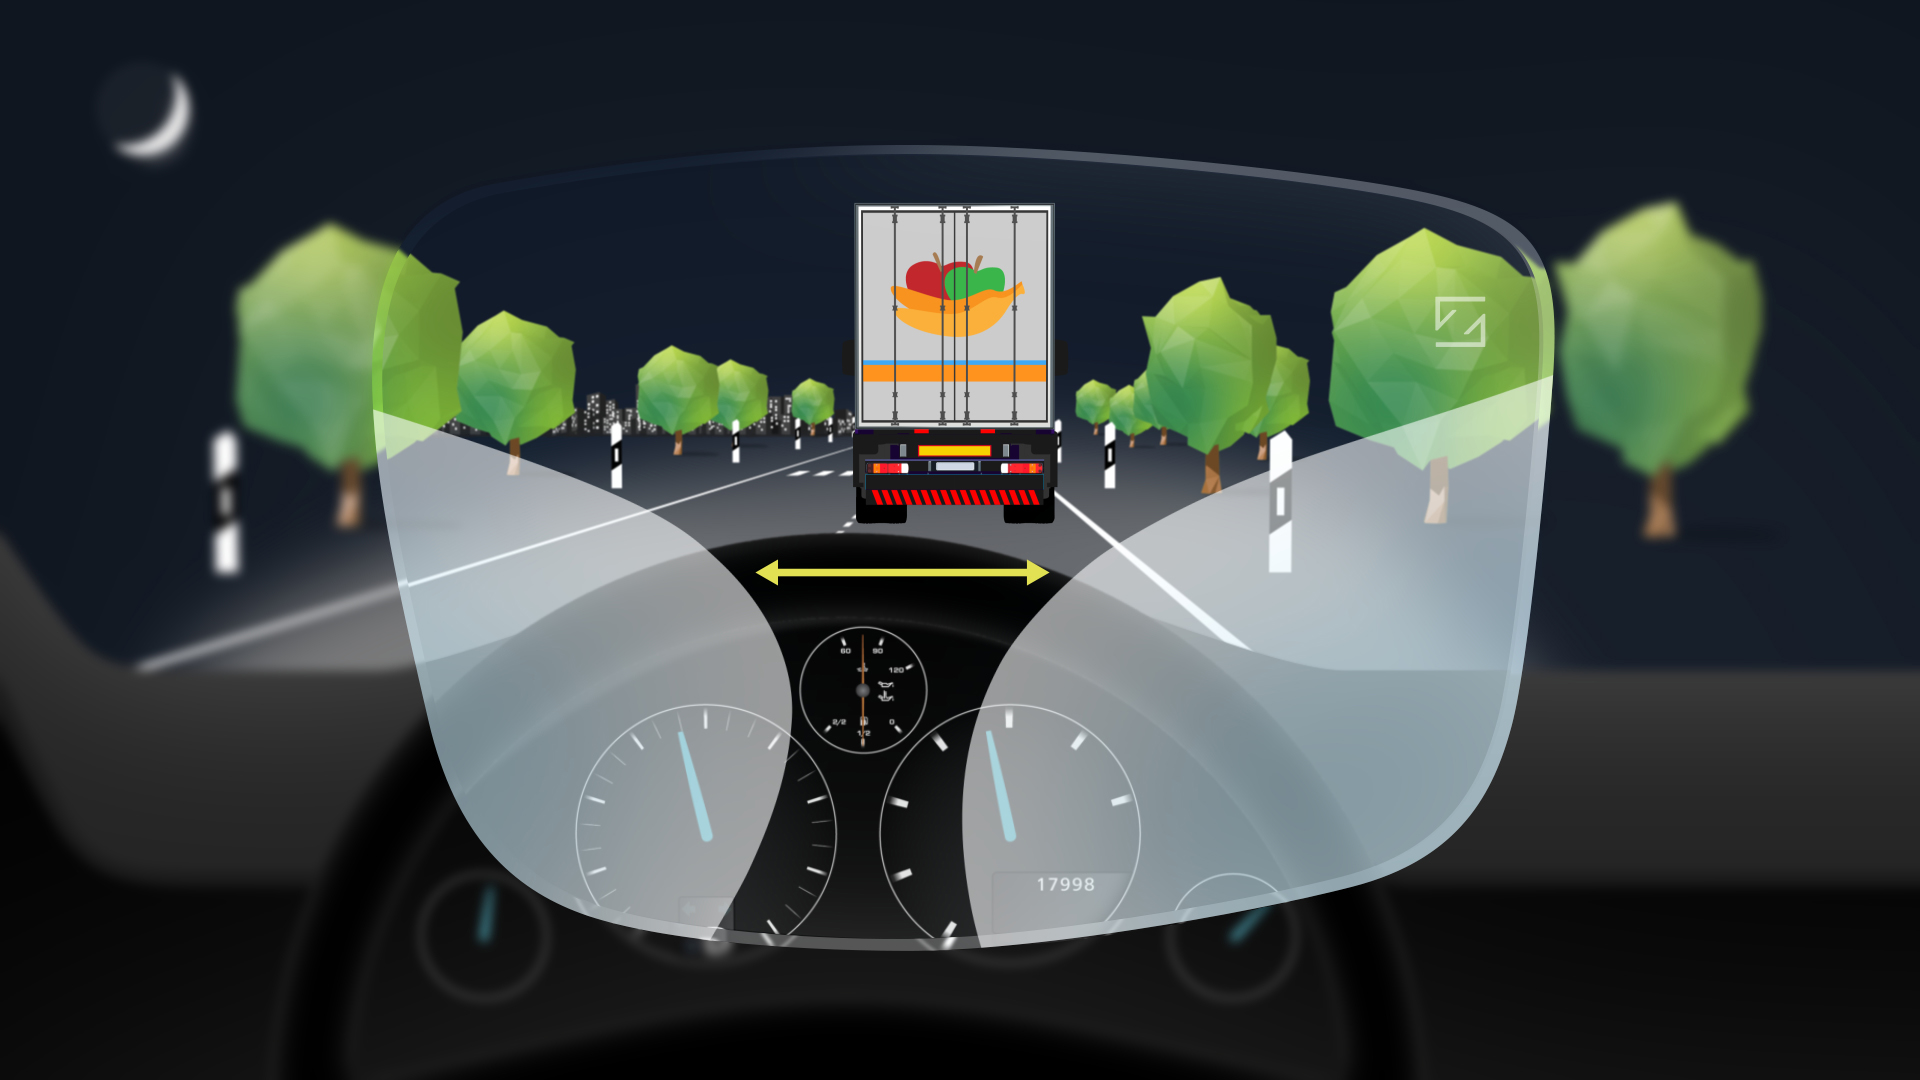 Up to 43% larger** mid-distance zone for easier focus switching between dashboard and mirrors. And up to 14% larger far-distance vision zone for a wider view of the road.